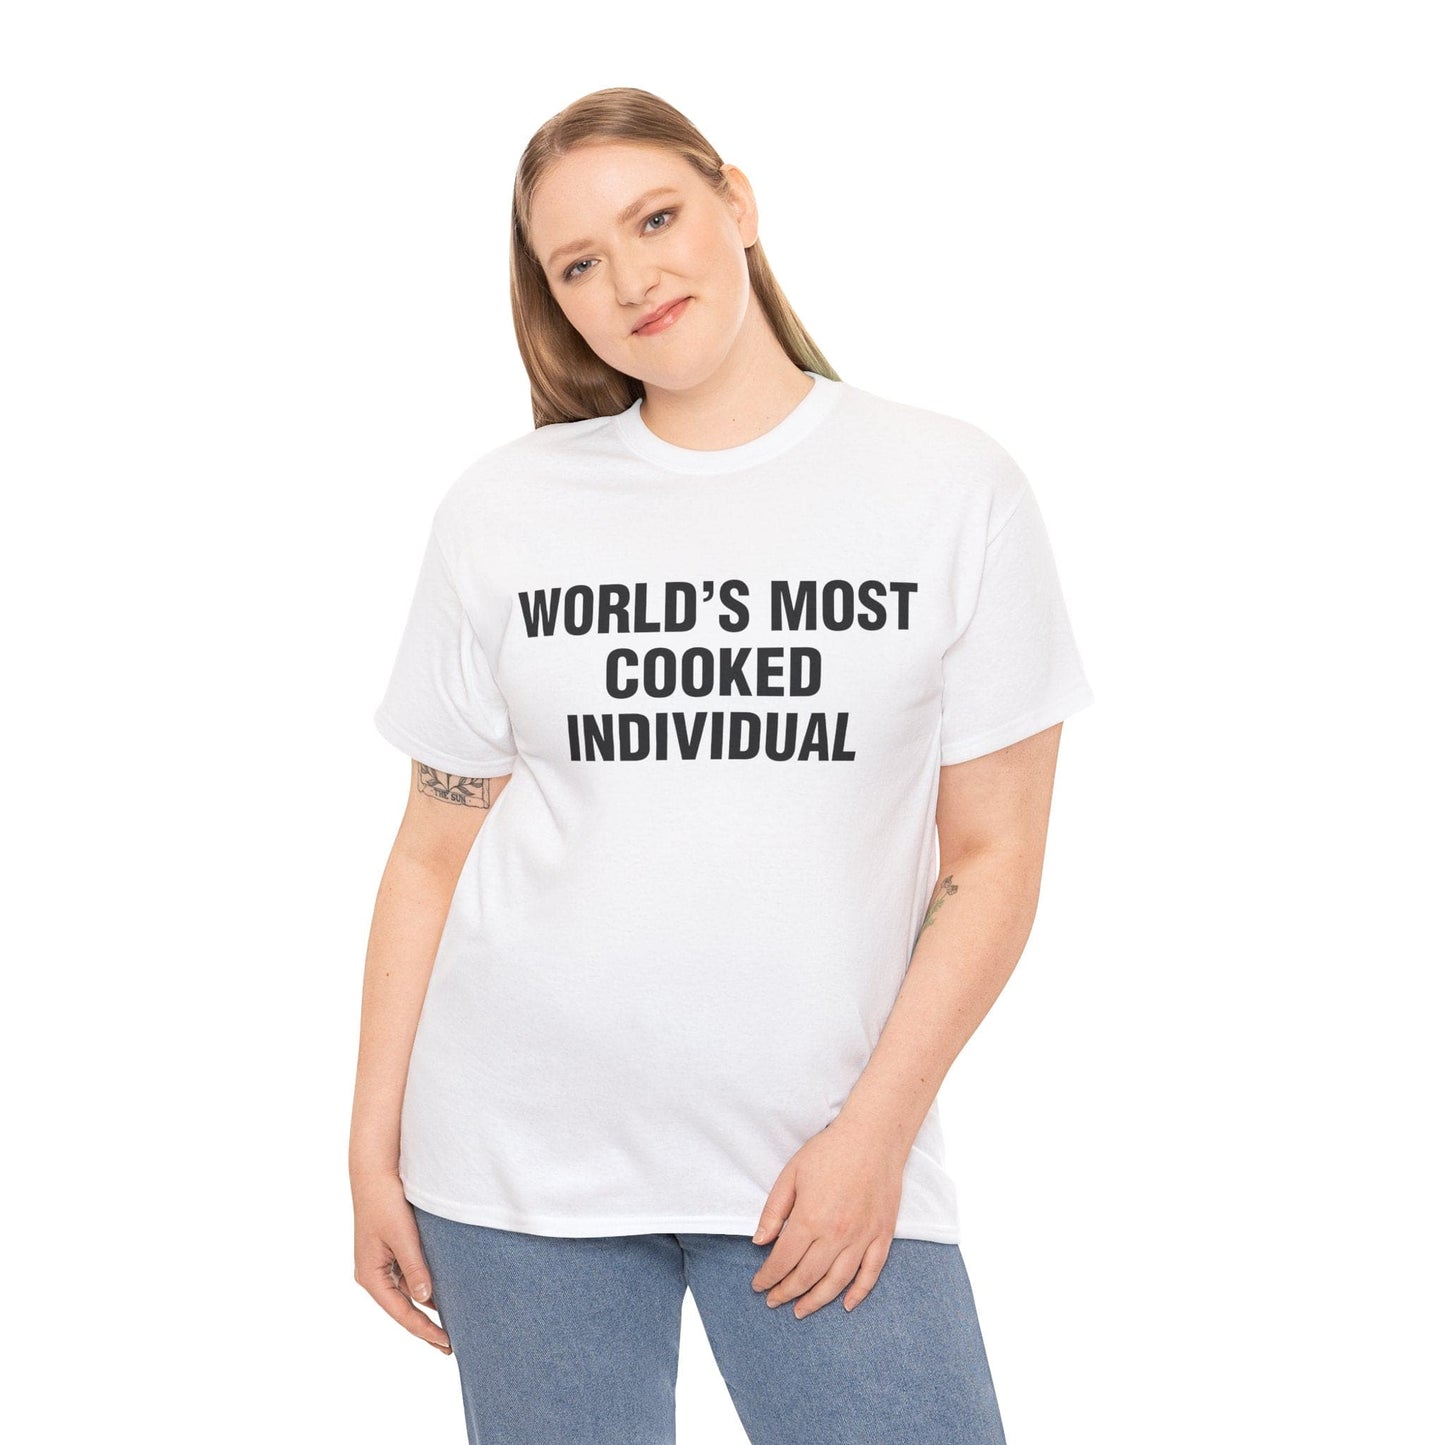 WORLD’S MOST COOKED INDIVIDUAL